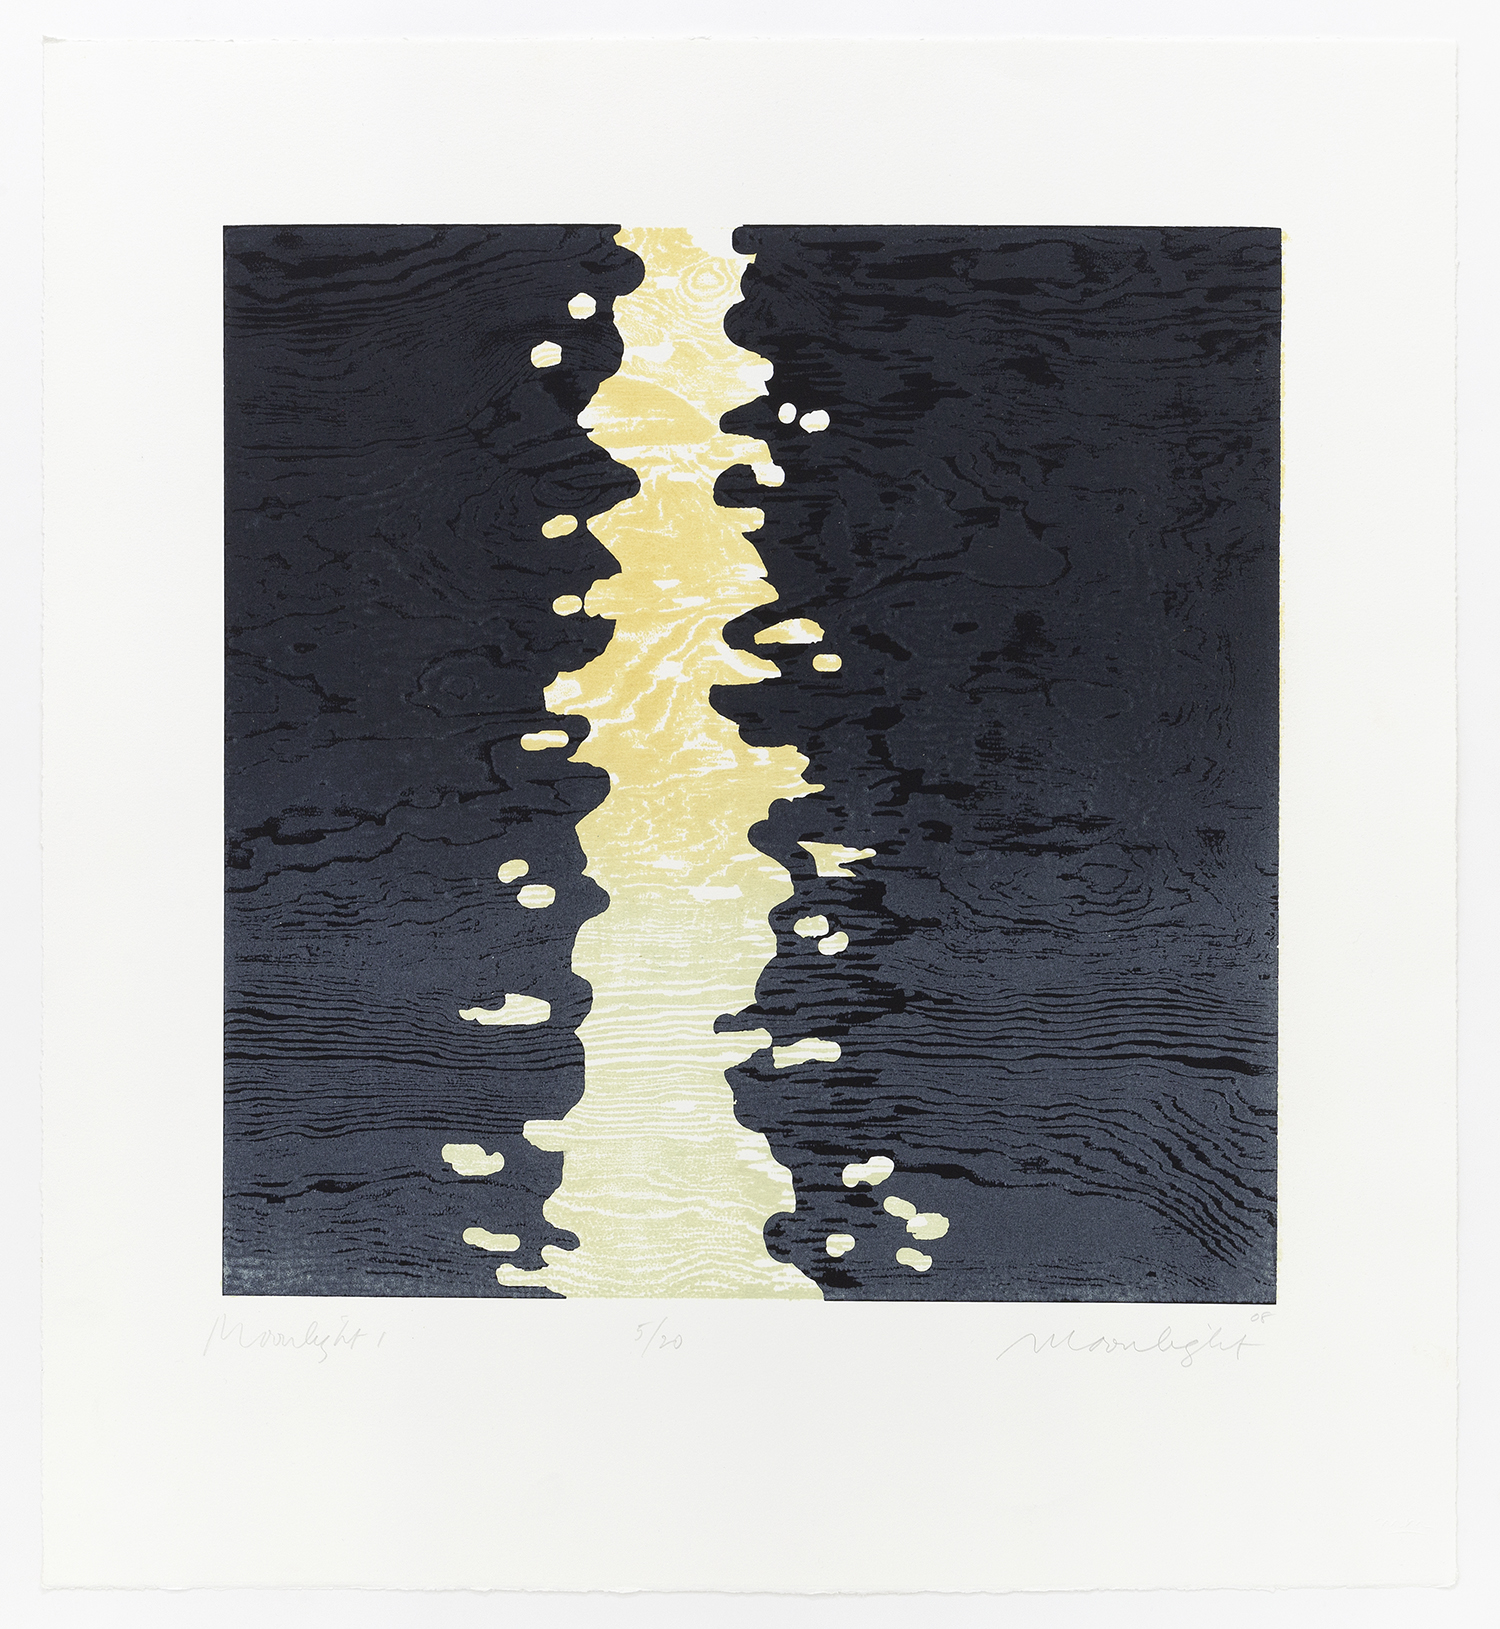 Moonlight 1, 2007, Woodcut, 26 x 24 inches (66 x 60 cm), Edition of 20